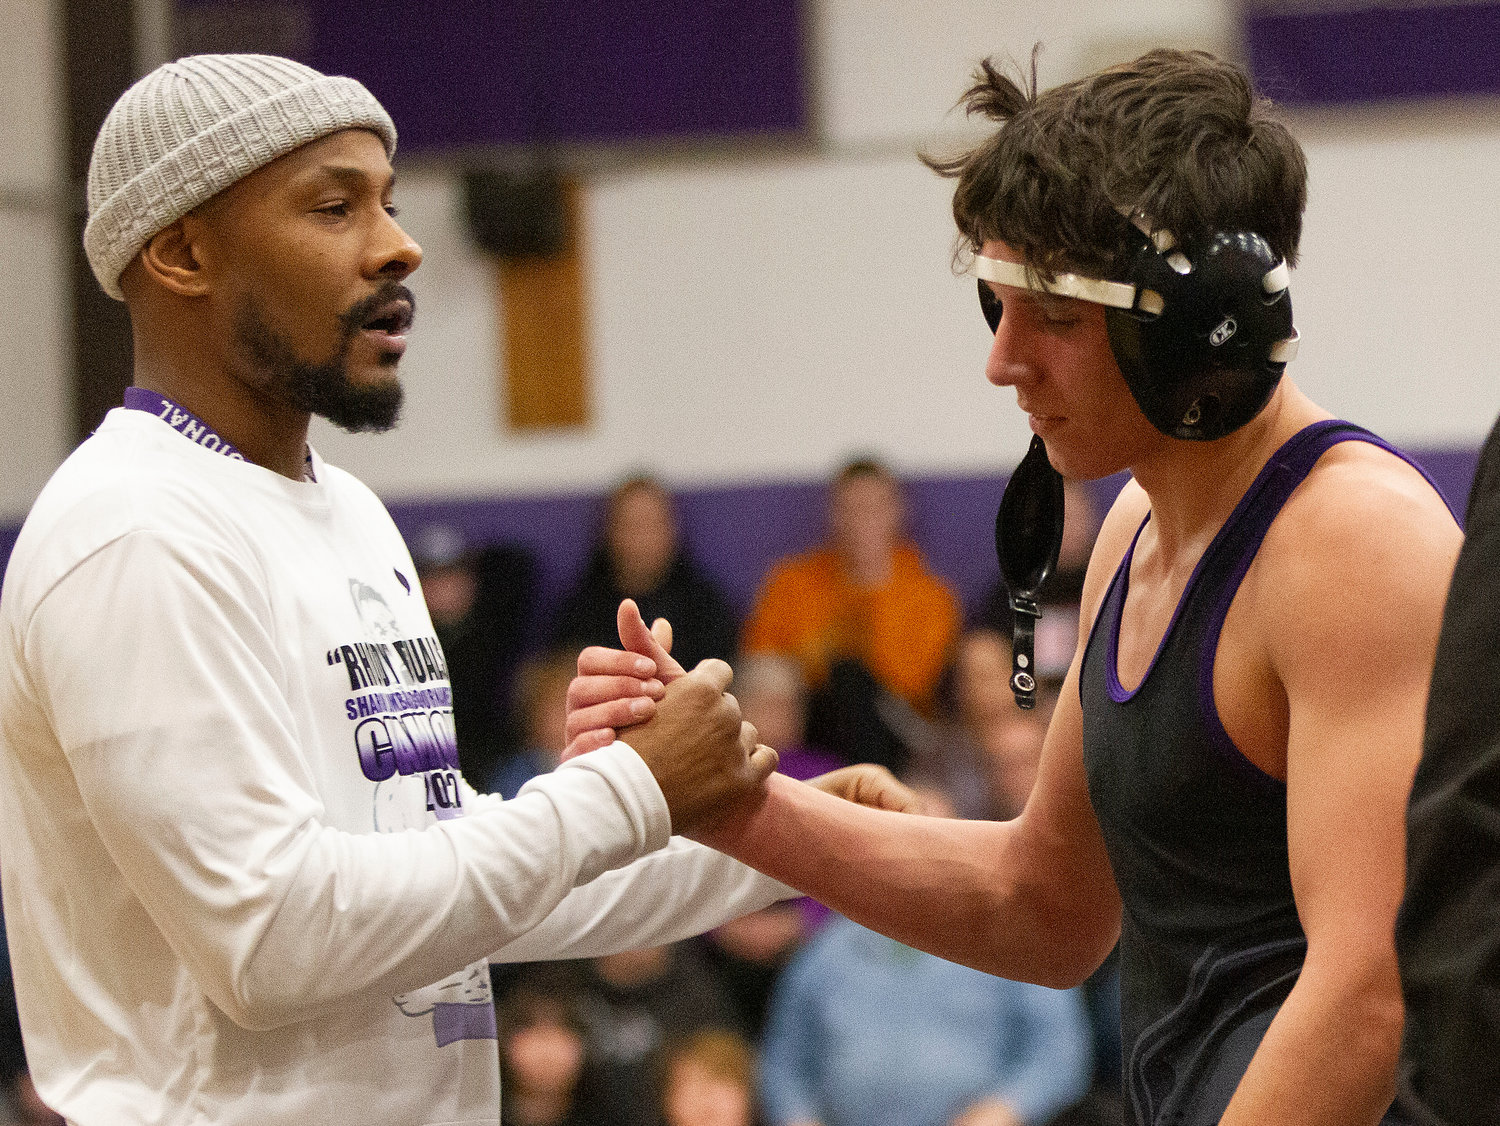 Head Coach Jefferey Eutsay shakes hands with Mason Furtado after he won his match, beating Cumberland’s Jake St. Godard by a decision at 145 pounds. “Mason’s a great wrestler,” Coach Eutsay said. “He’s ready to go every match. I couldn’t ask for a better captain.”